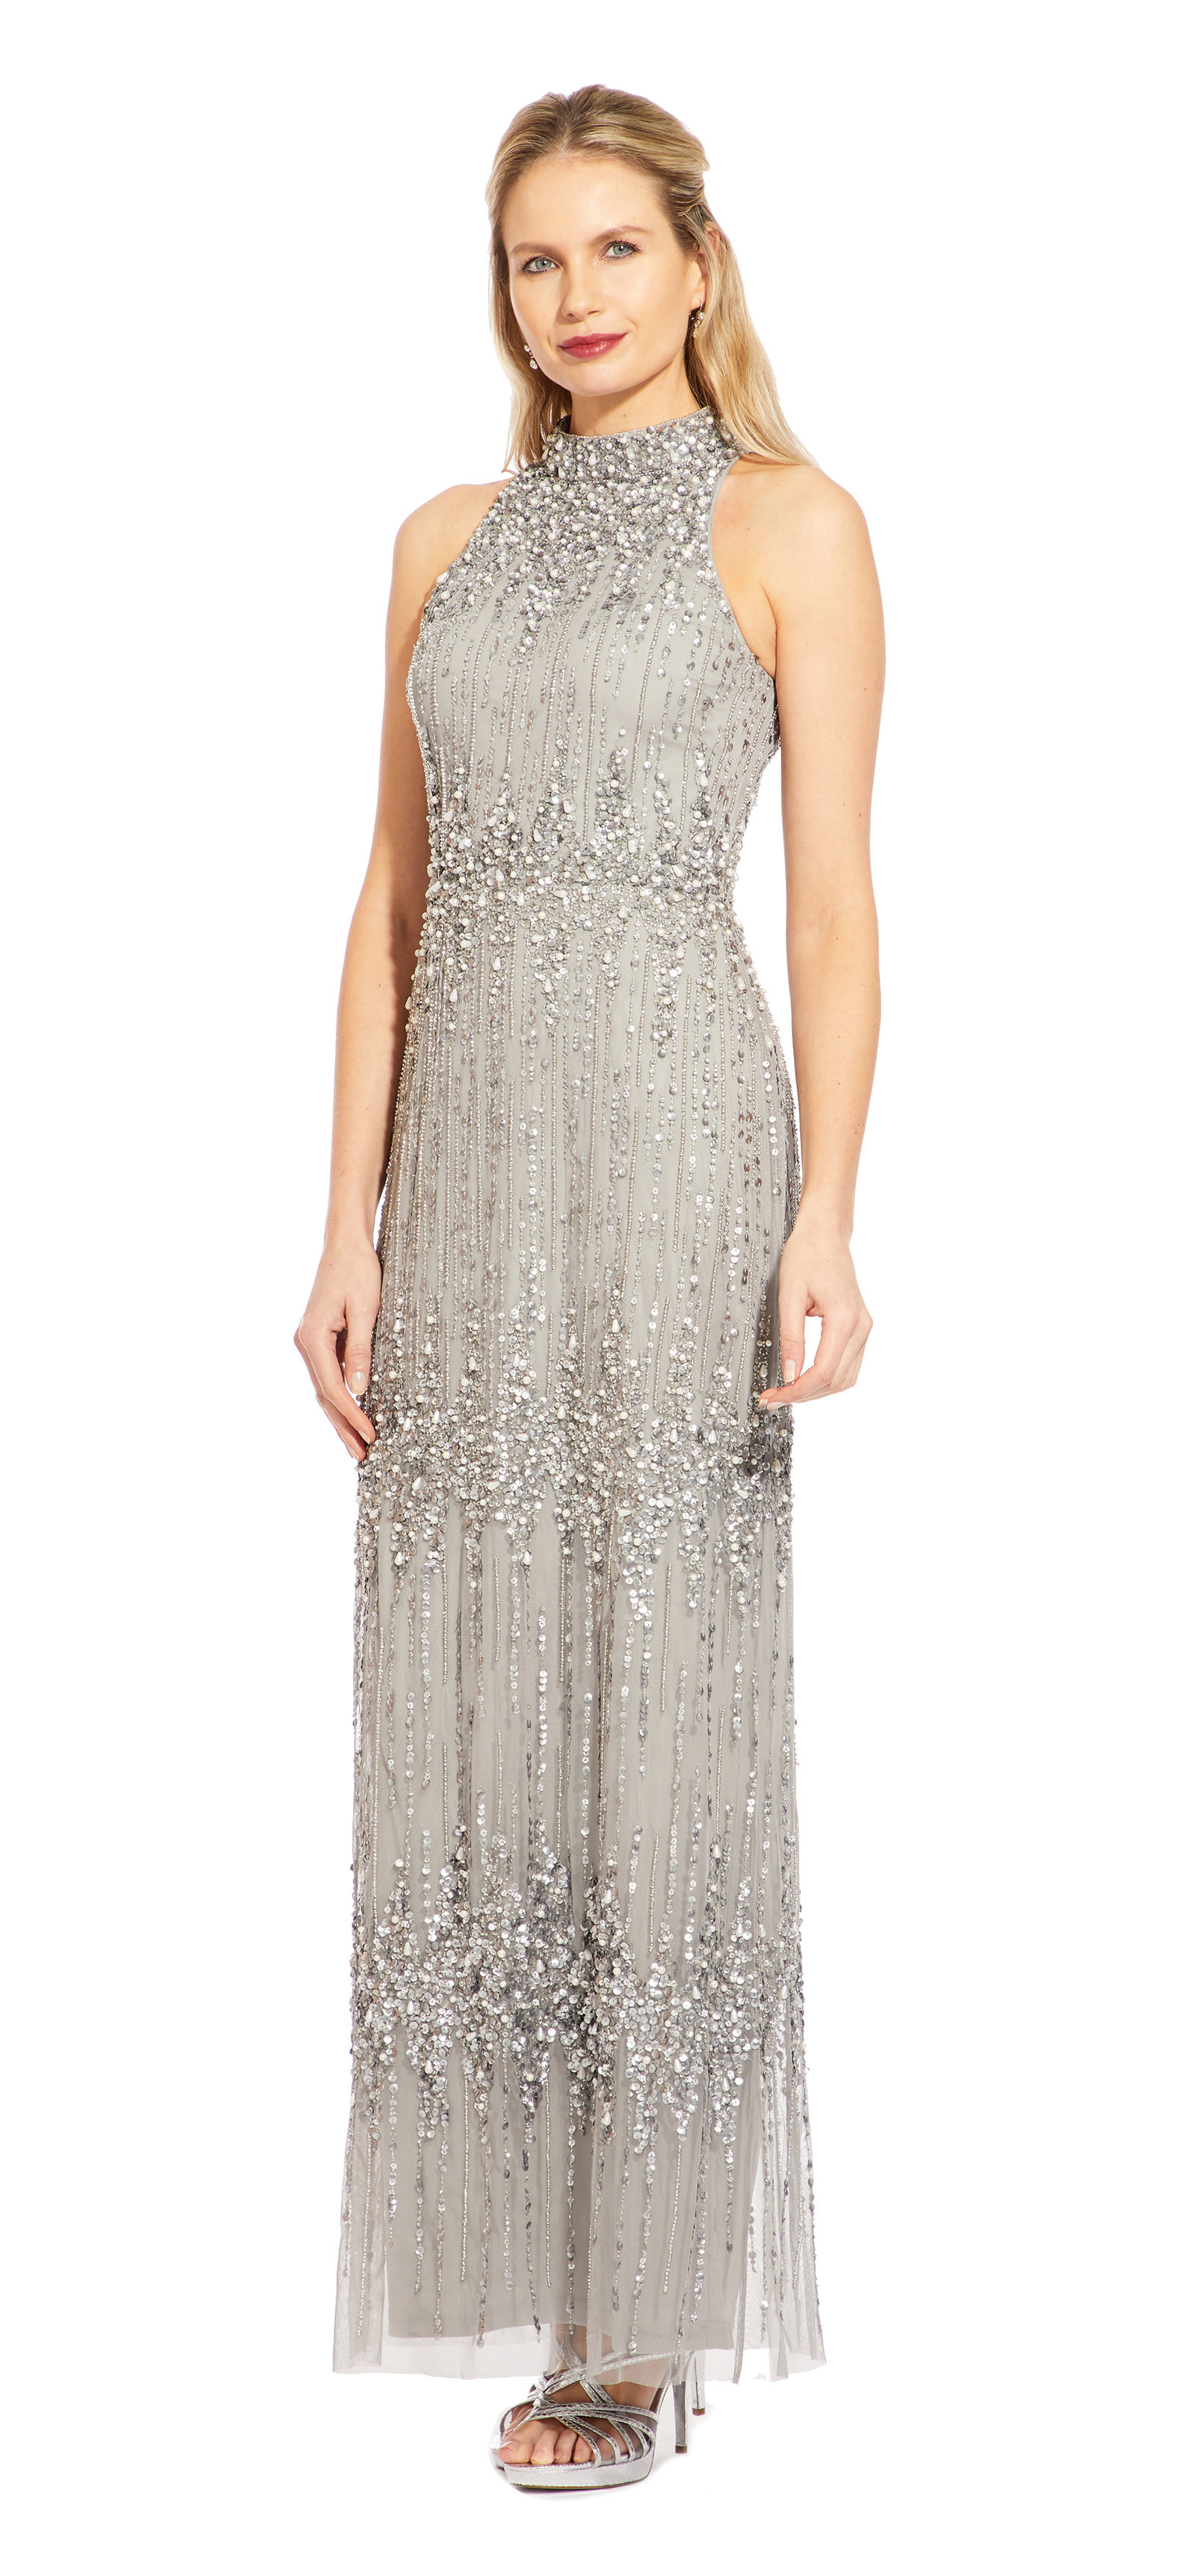 Wedding Guest Dresses: Cocktail Dresses, Evening Gowns & More